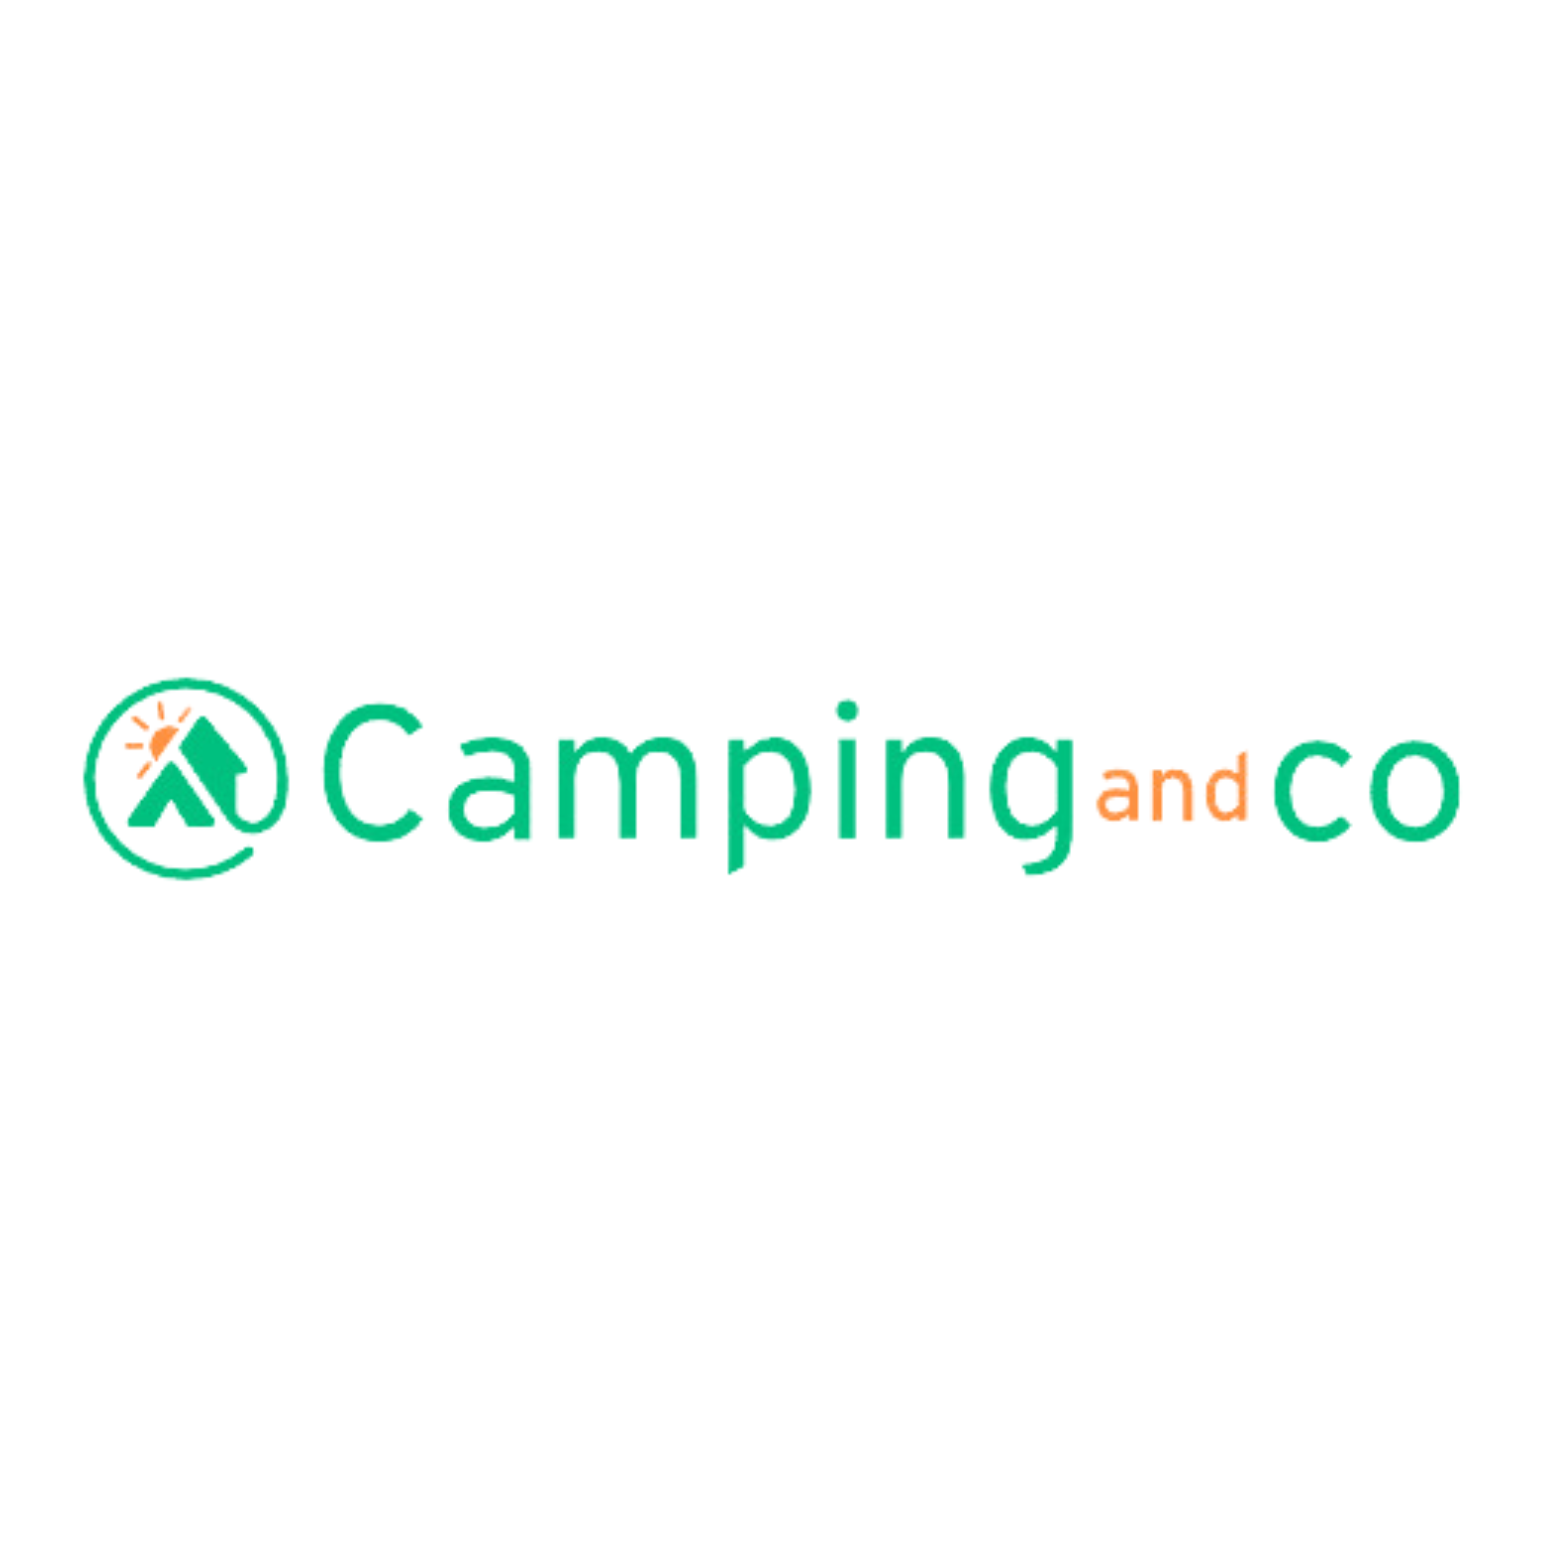 Camping and CO